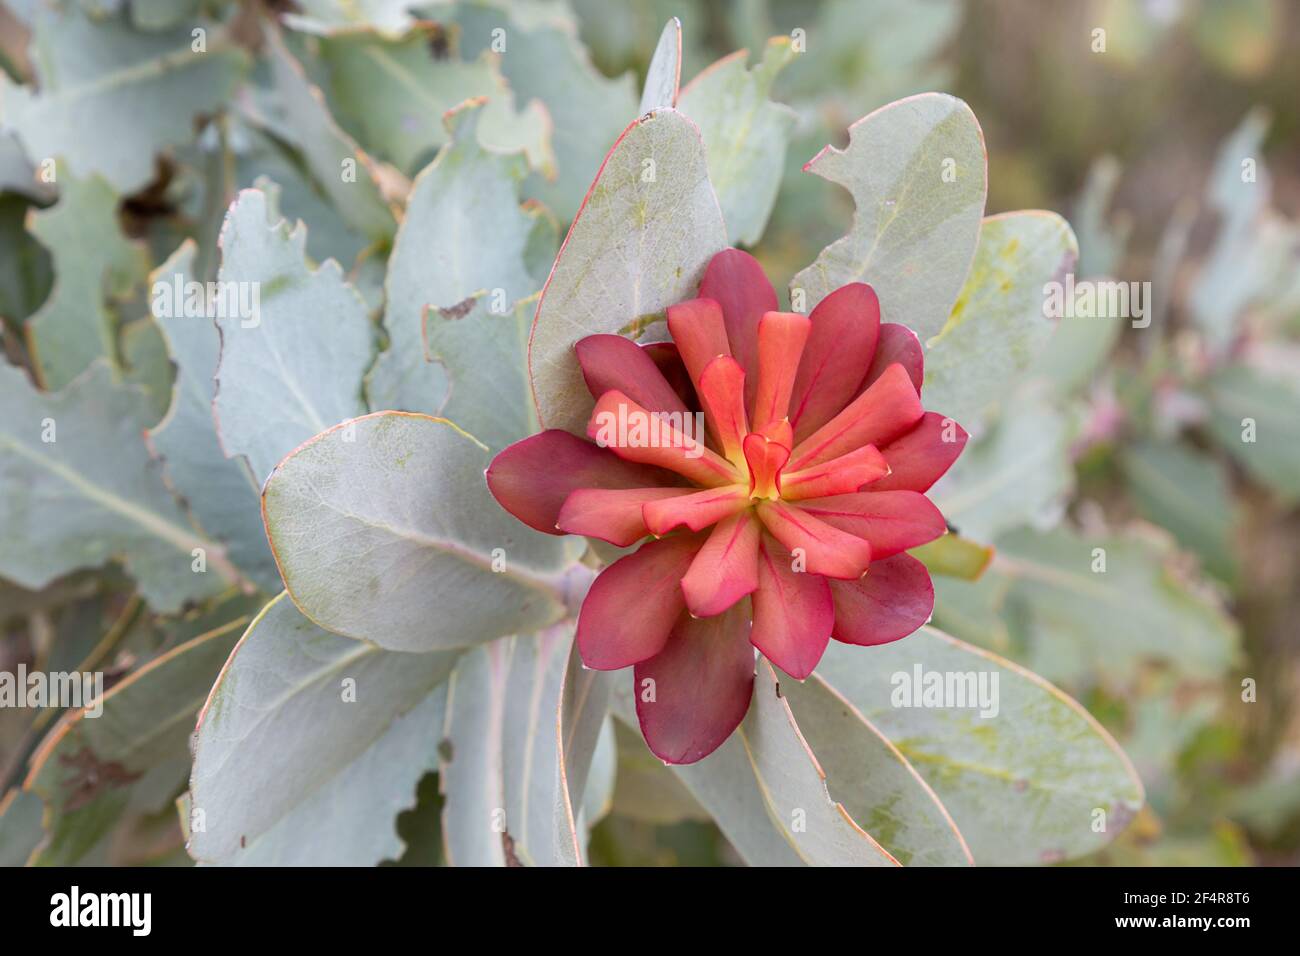 The red flower of Protea nitida, a sugarbush, seen in the Cederberg Mountains in the Western Cape of South Africa Stock Photo